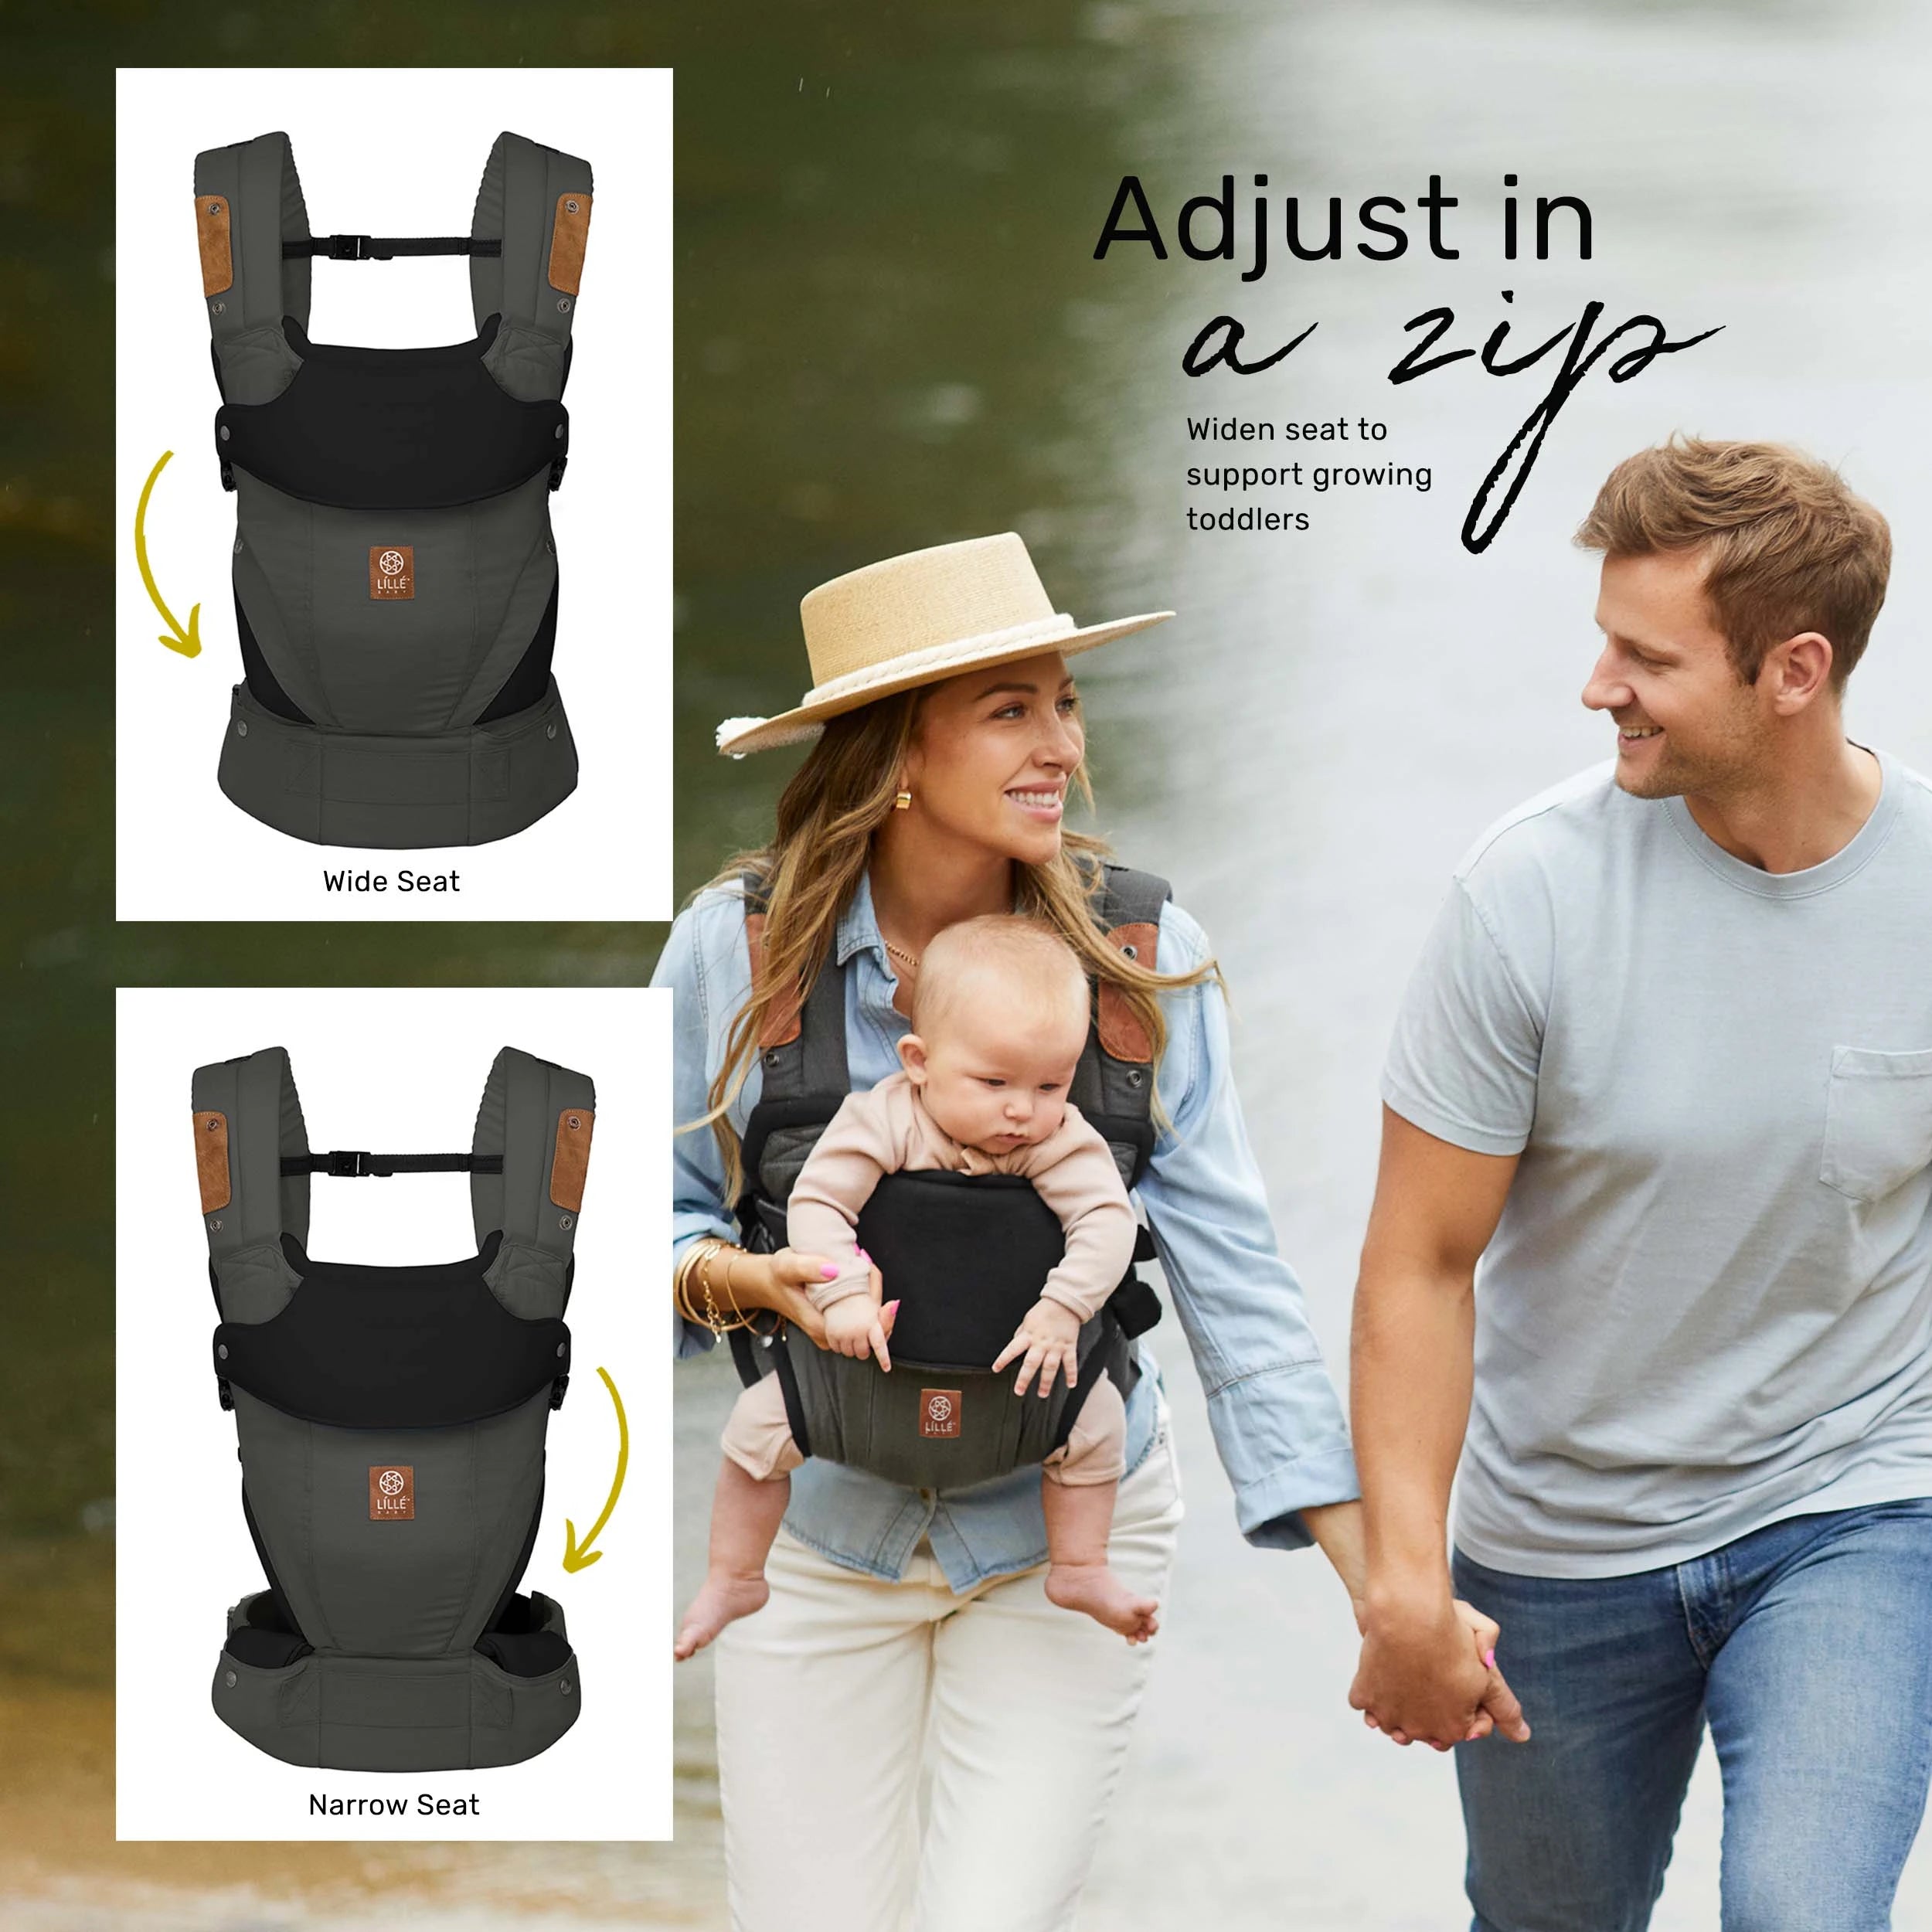 Elevate adjust in a zip! Widen seat to support growing toddlers. Zip up to wide seat and zip down to narrow seat.